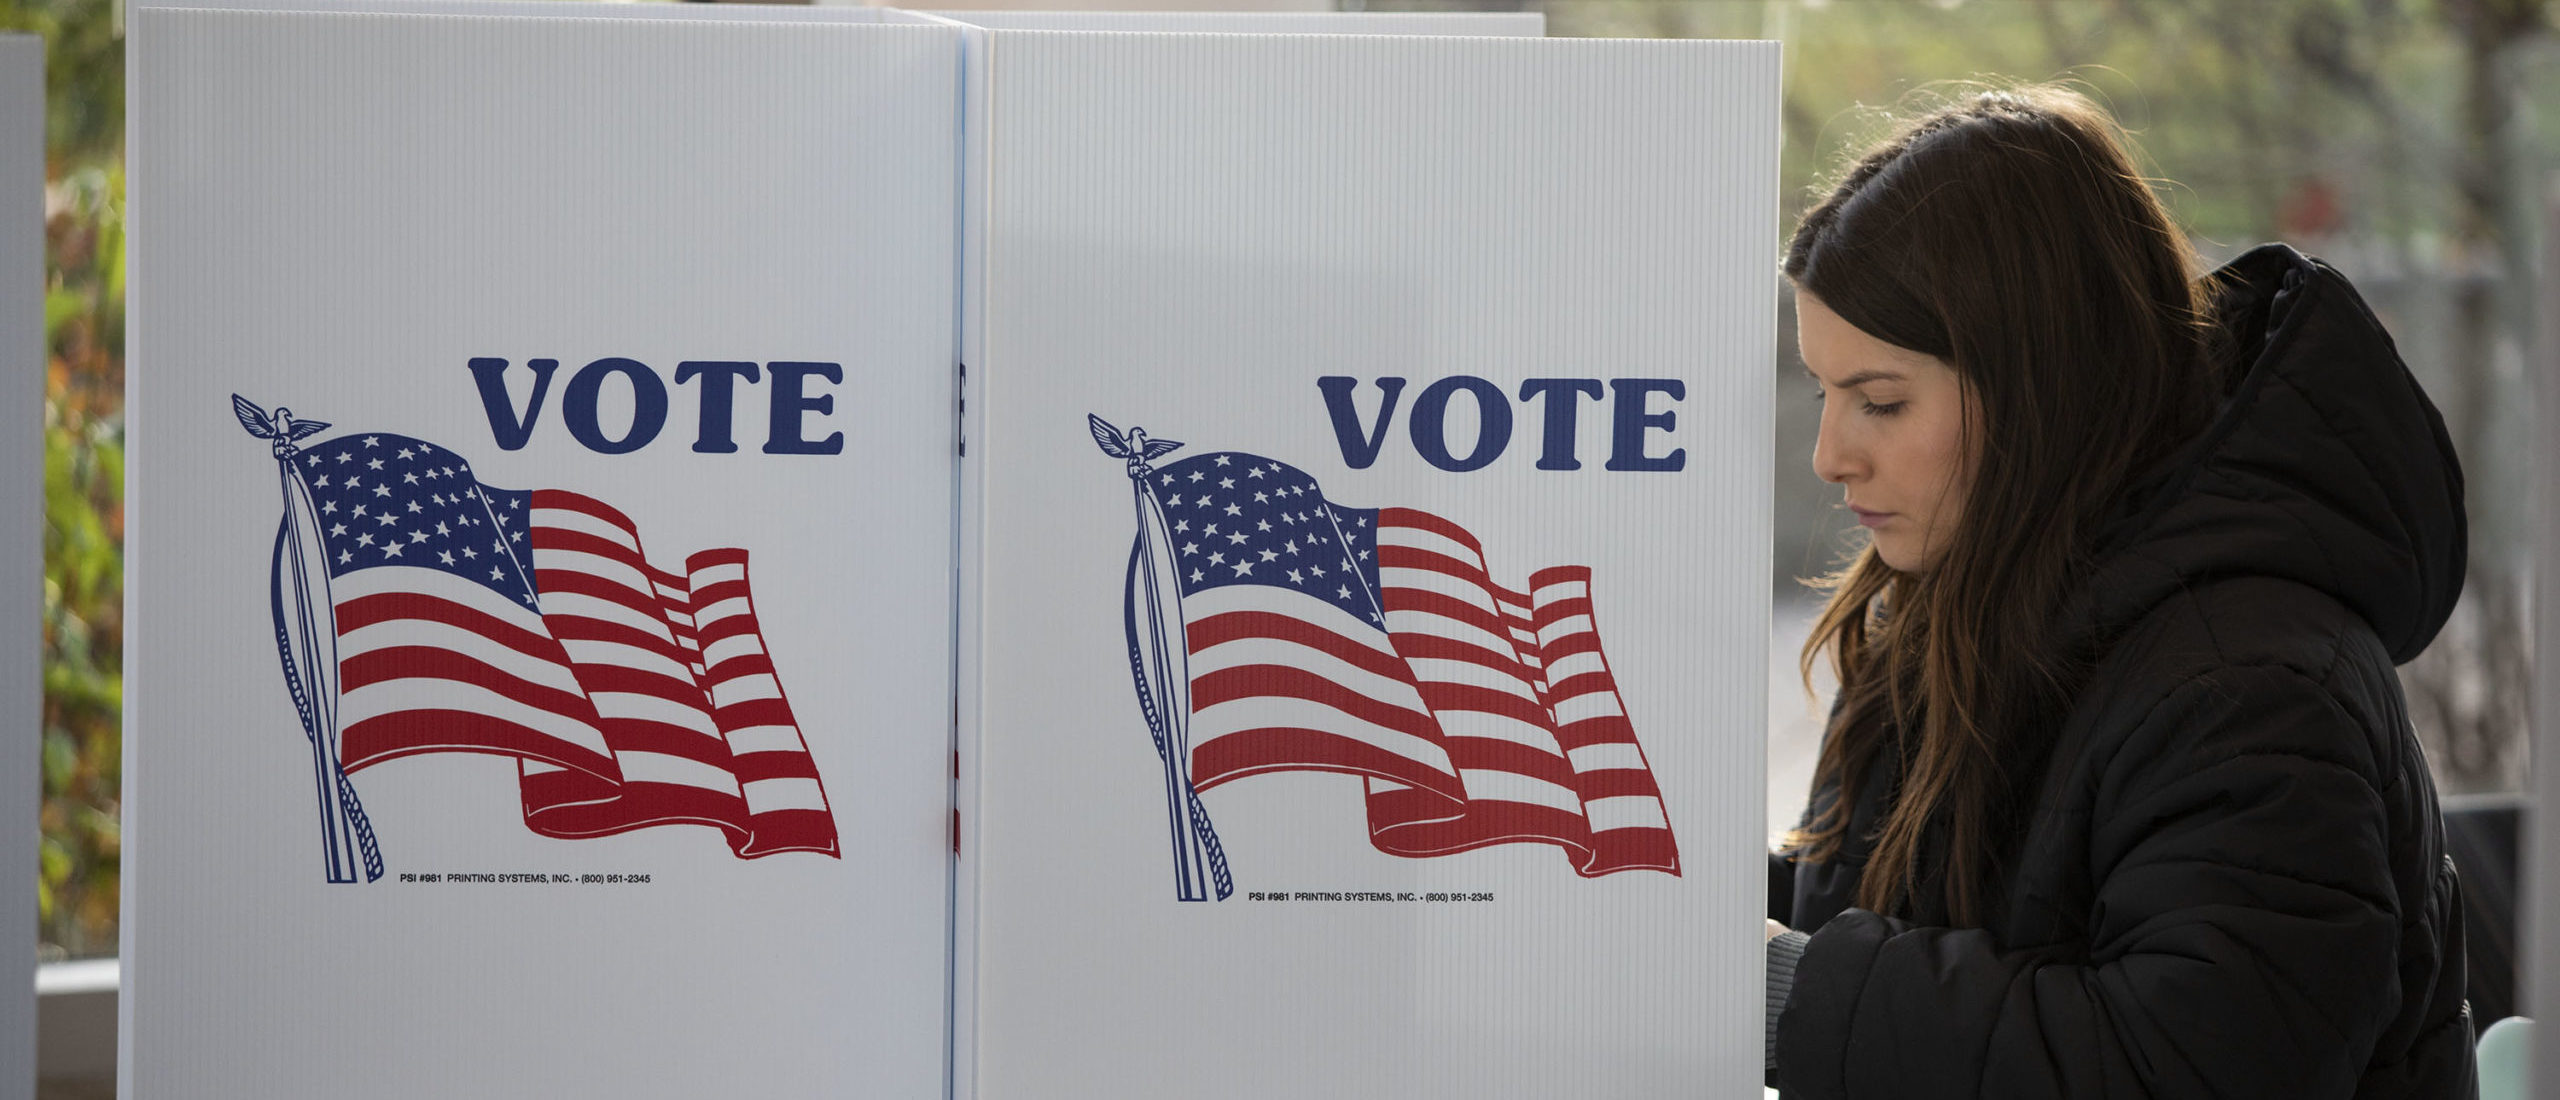 A woman votes in the 2022 midterm election on Election Day at a polling location on the Michigan State University campus on November 8, 2022 in East Lansing, Michigan.